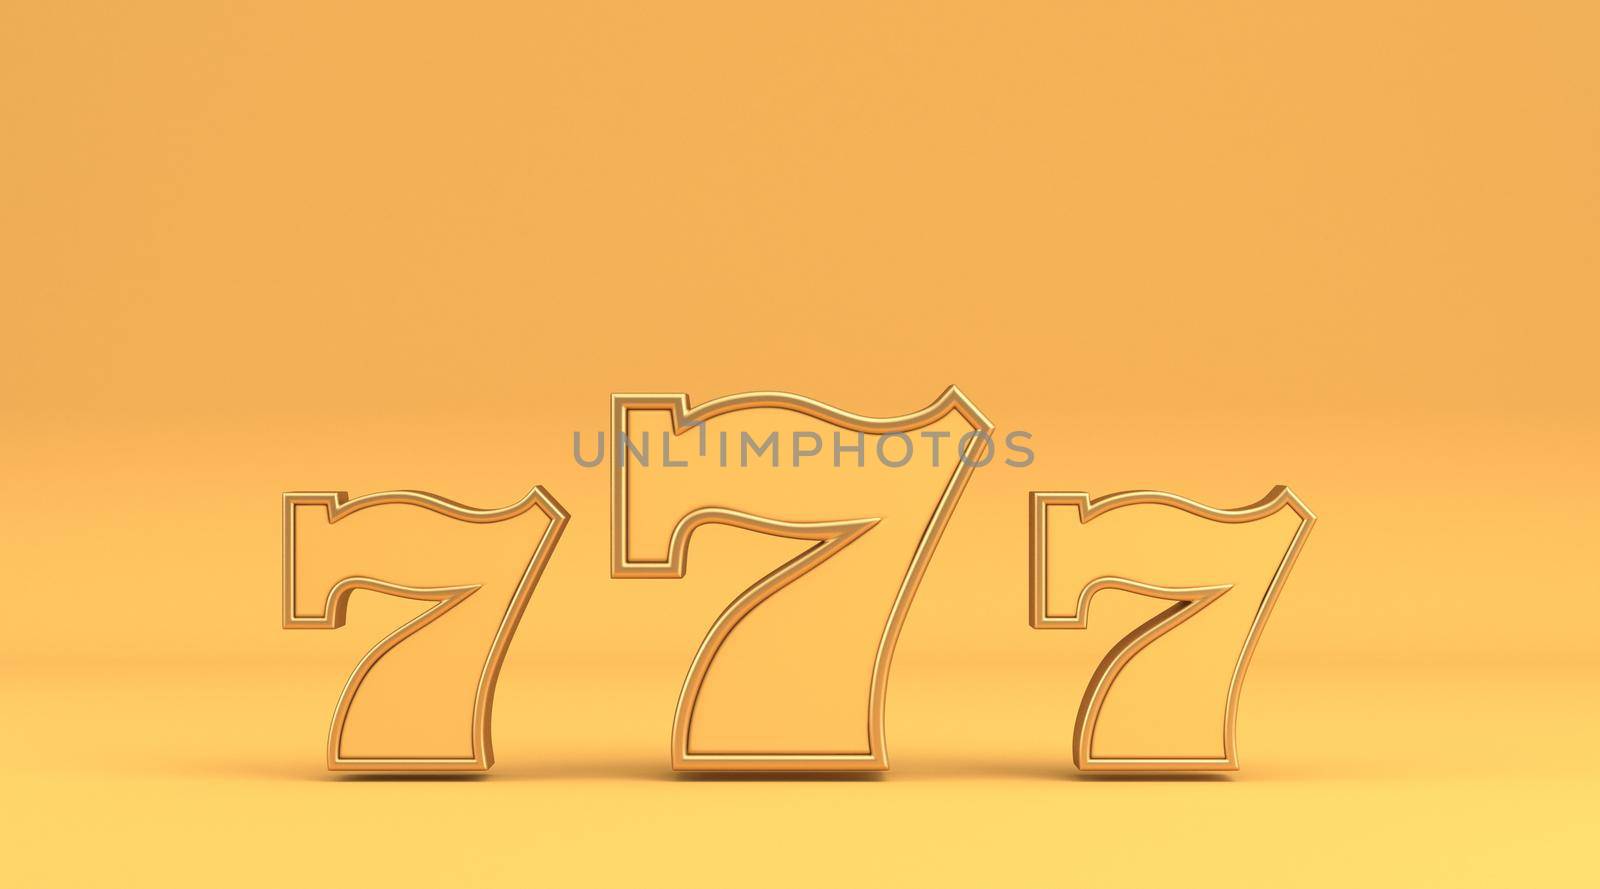 Yellow 777 sign 3D rendering illustration isolated on yellow background